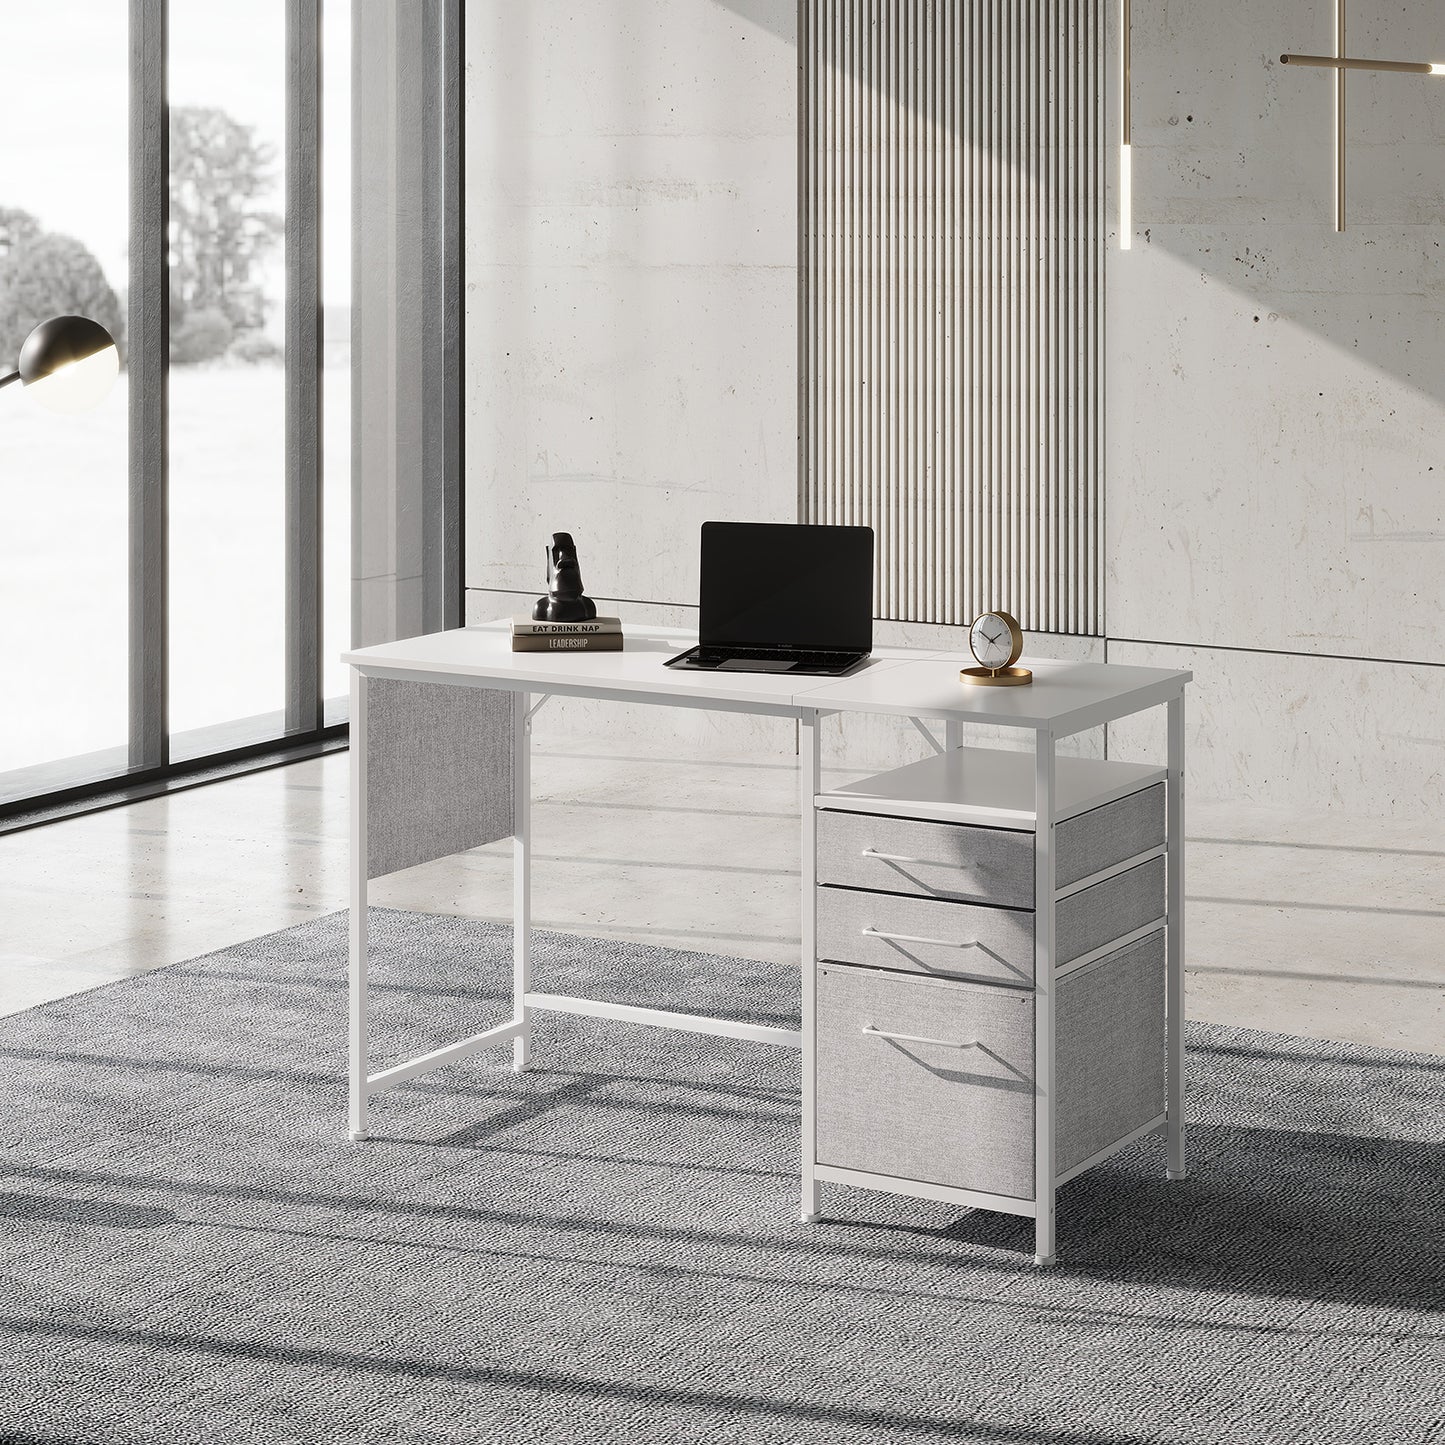 MAIHAIL 47 inch Desk with Drawers, White